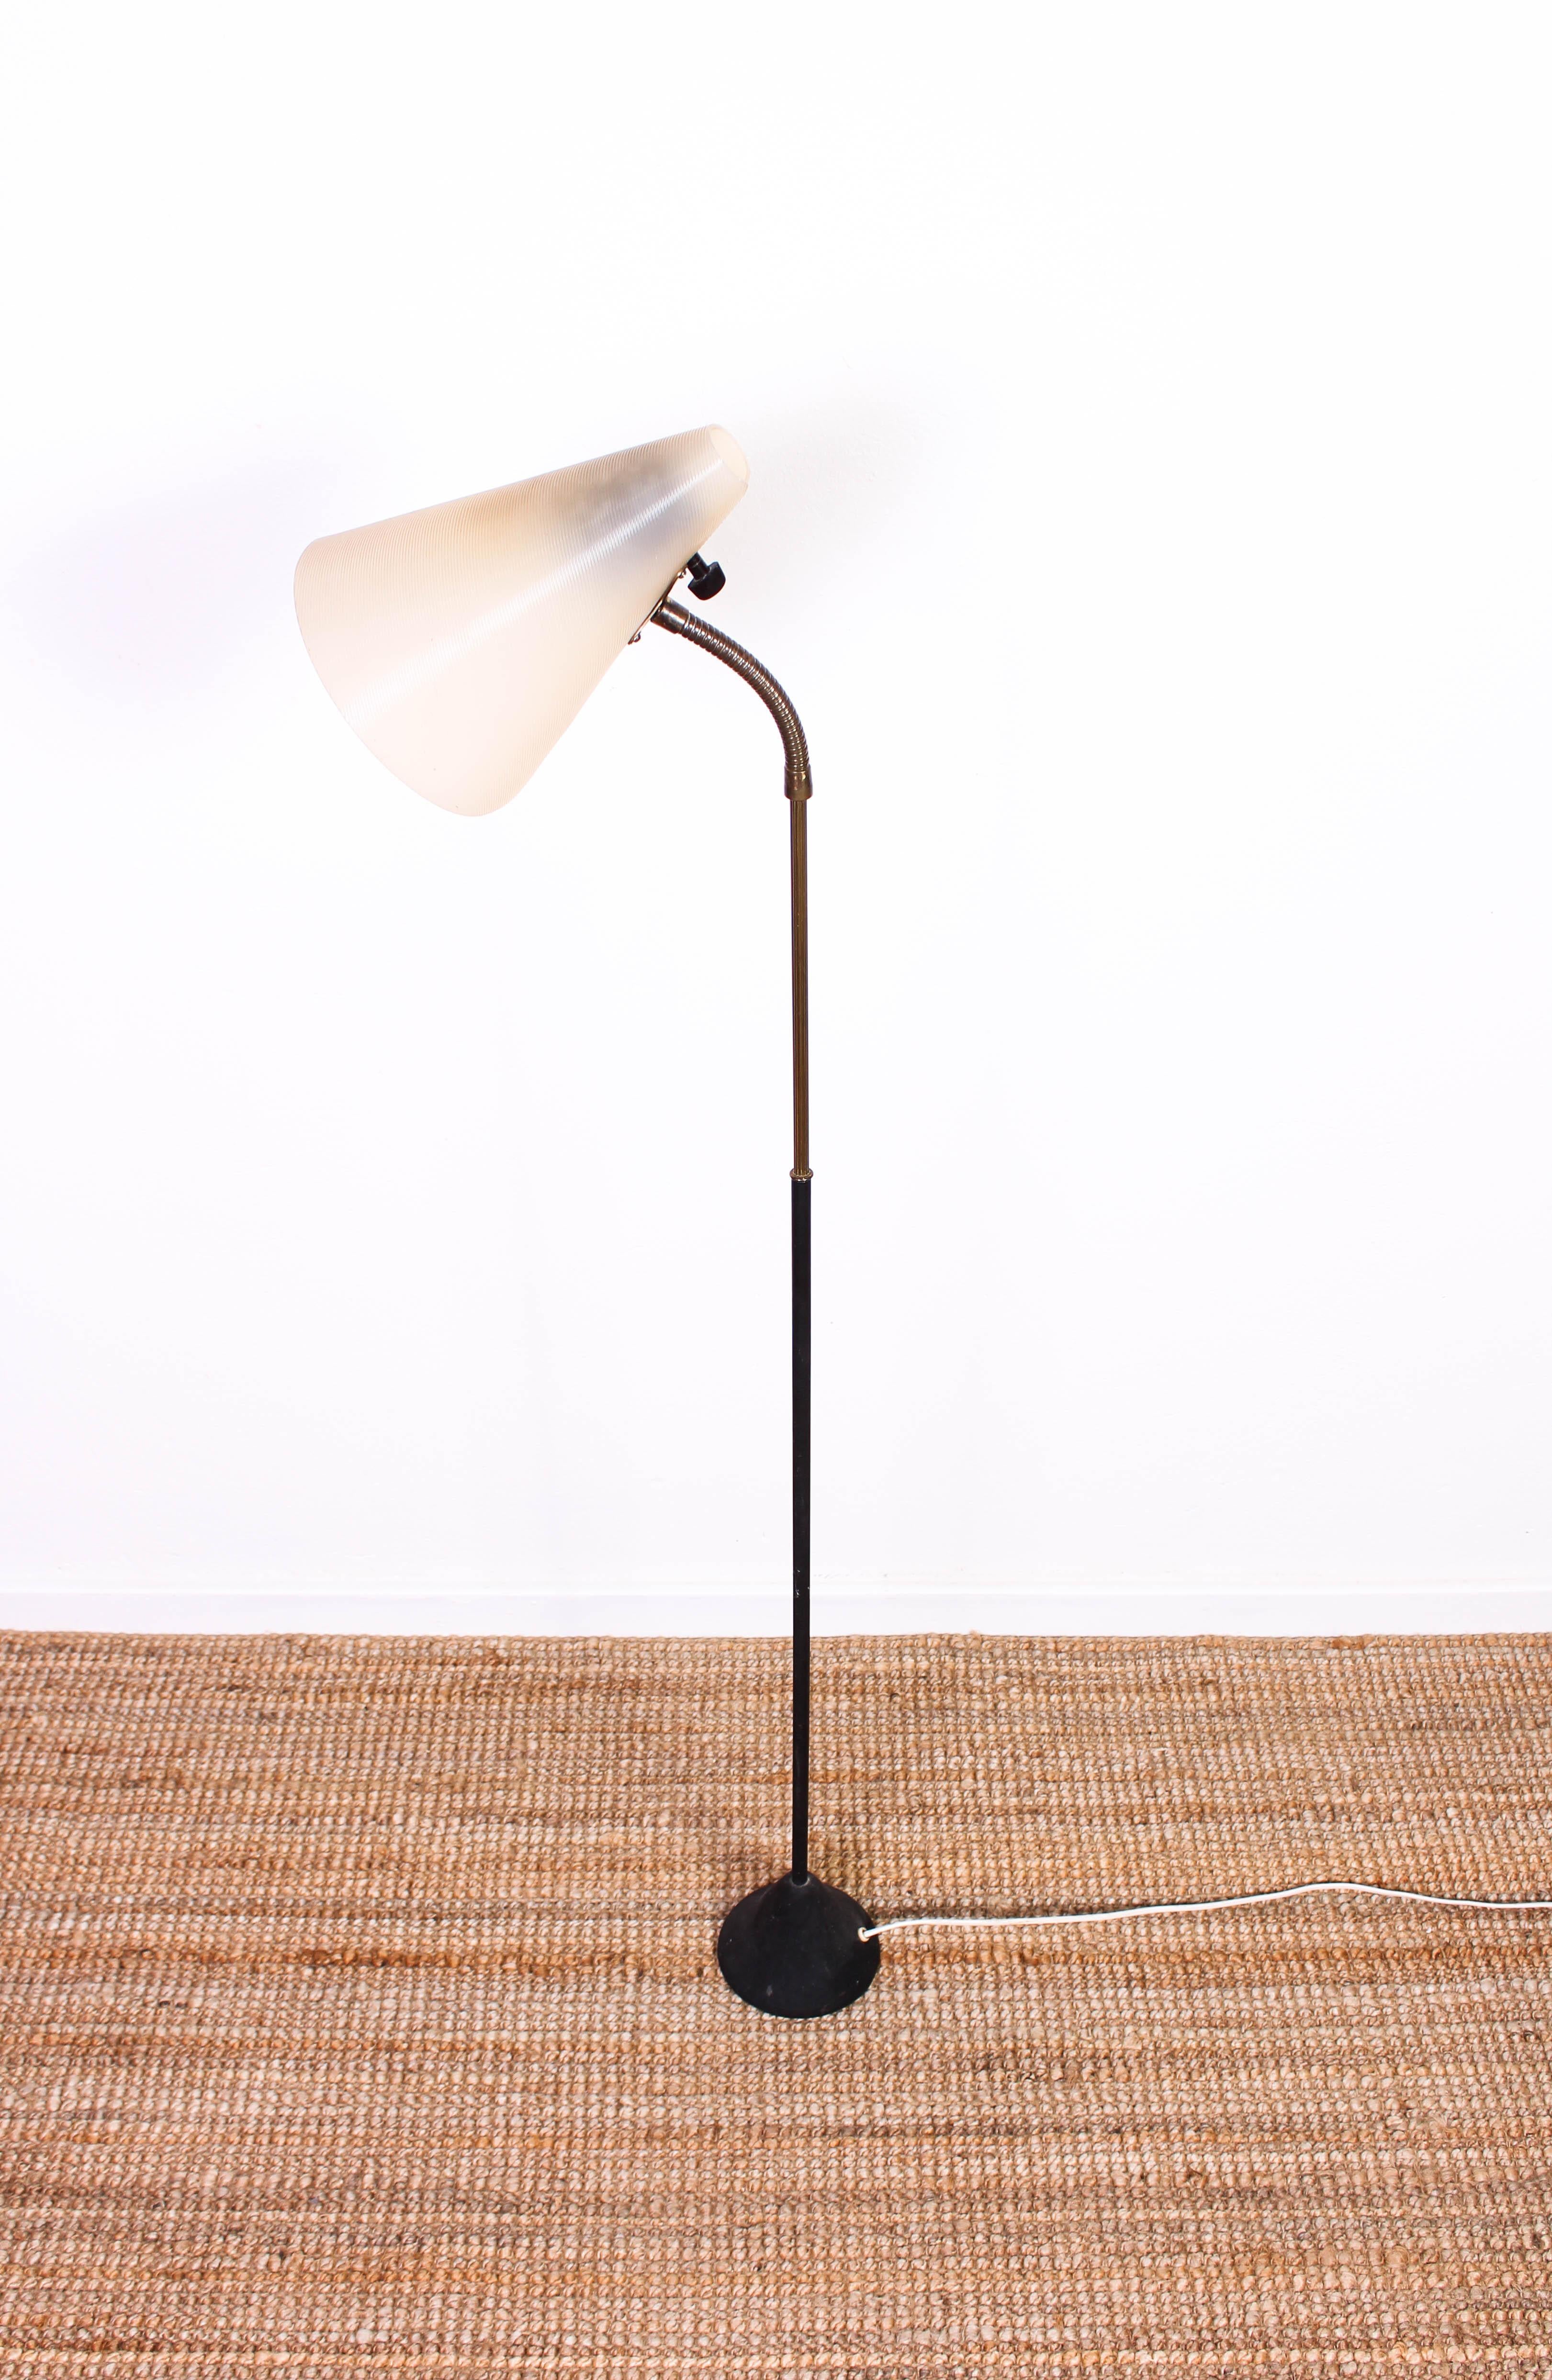 A midcentury (circa 1940s) floor lamp by Swedish company ASEA. The lamp is made out of a cast iron base, brass and a plastic shade. Very nice model with fully functional wiring. The lamp is in very good vintage condition with signs of usage, patina,